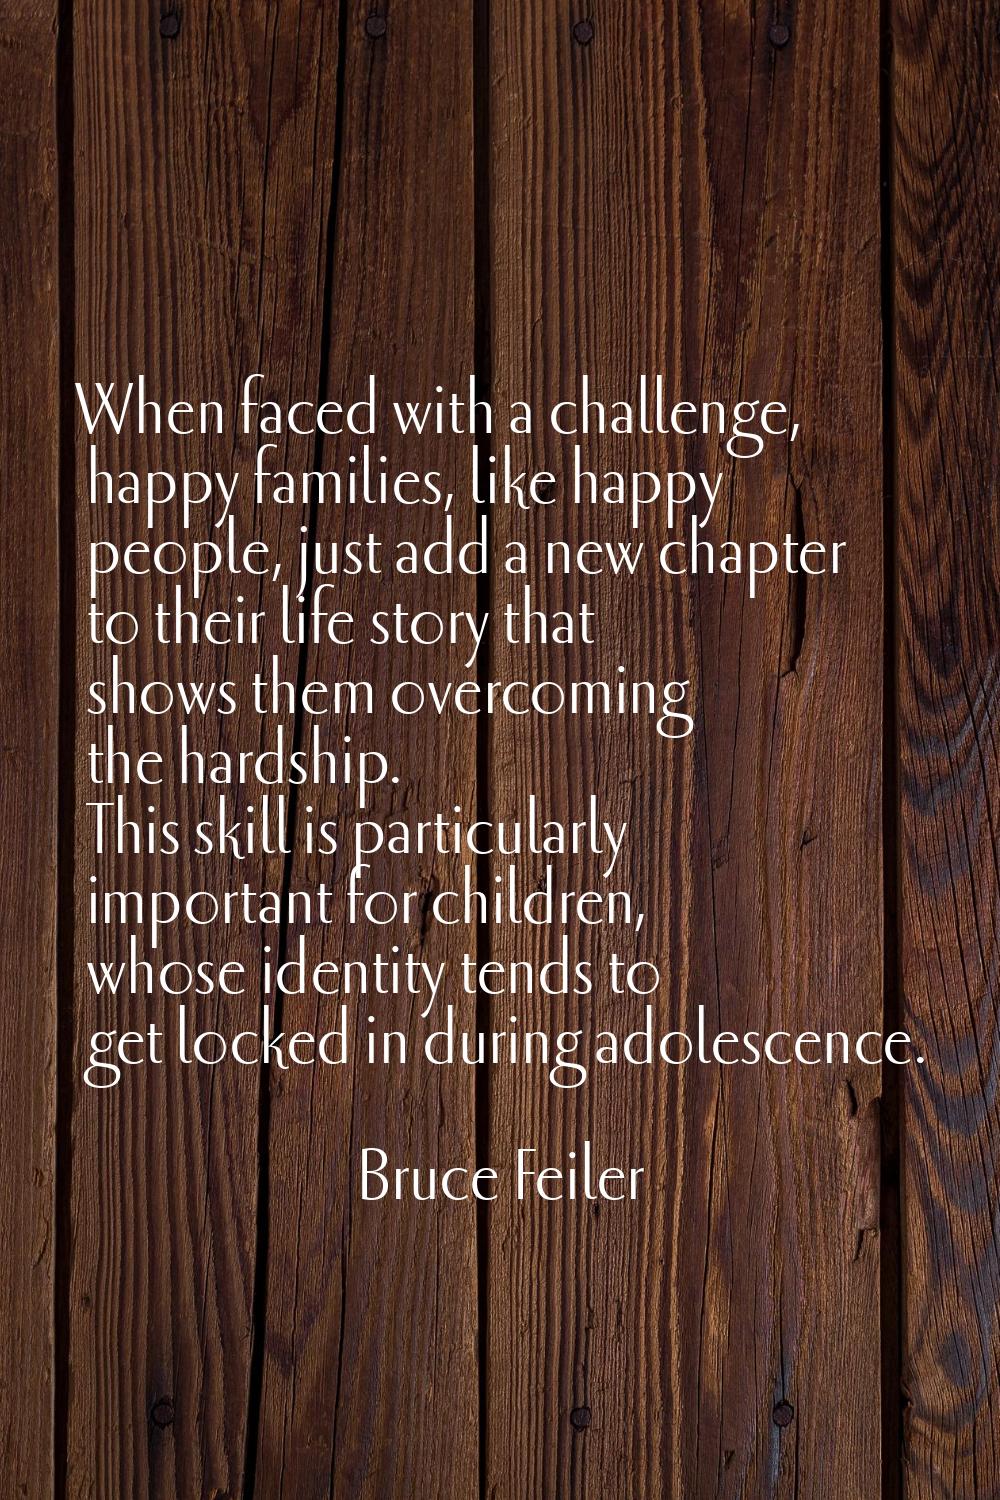 When faced with a challenge, happy families, like happy people, just add a new chapter to their lif